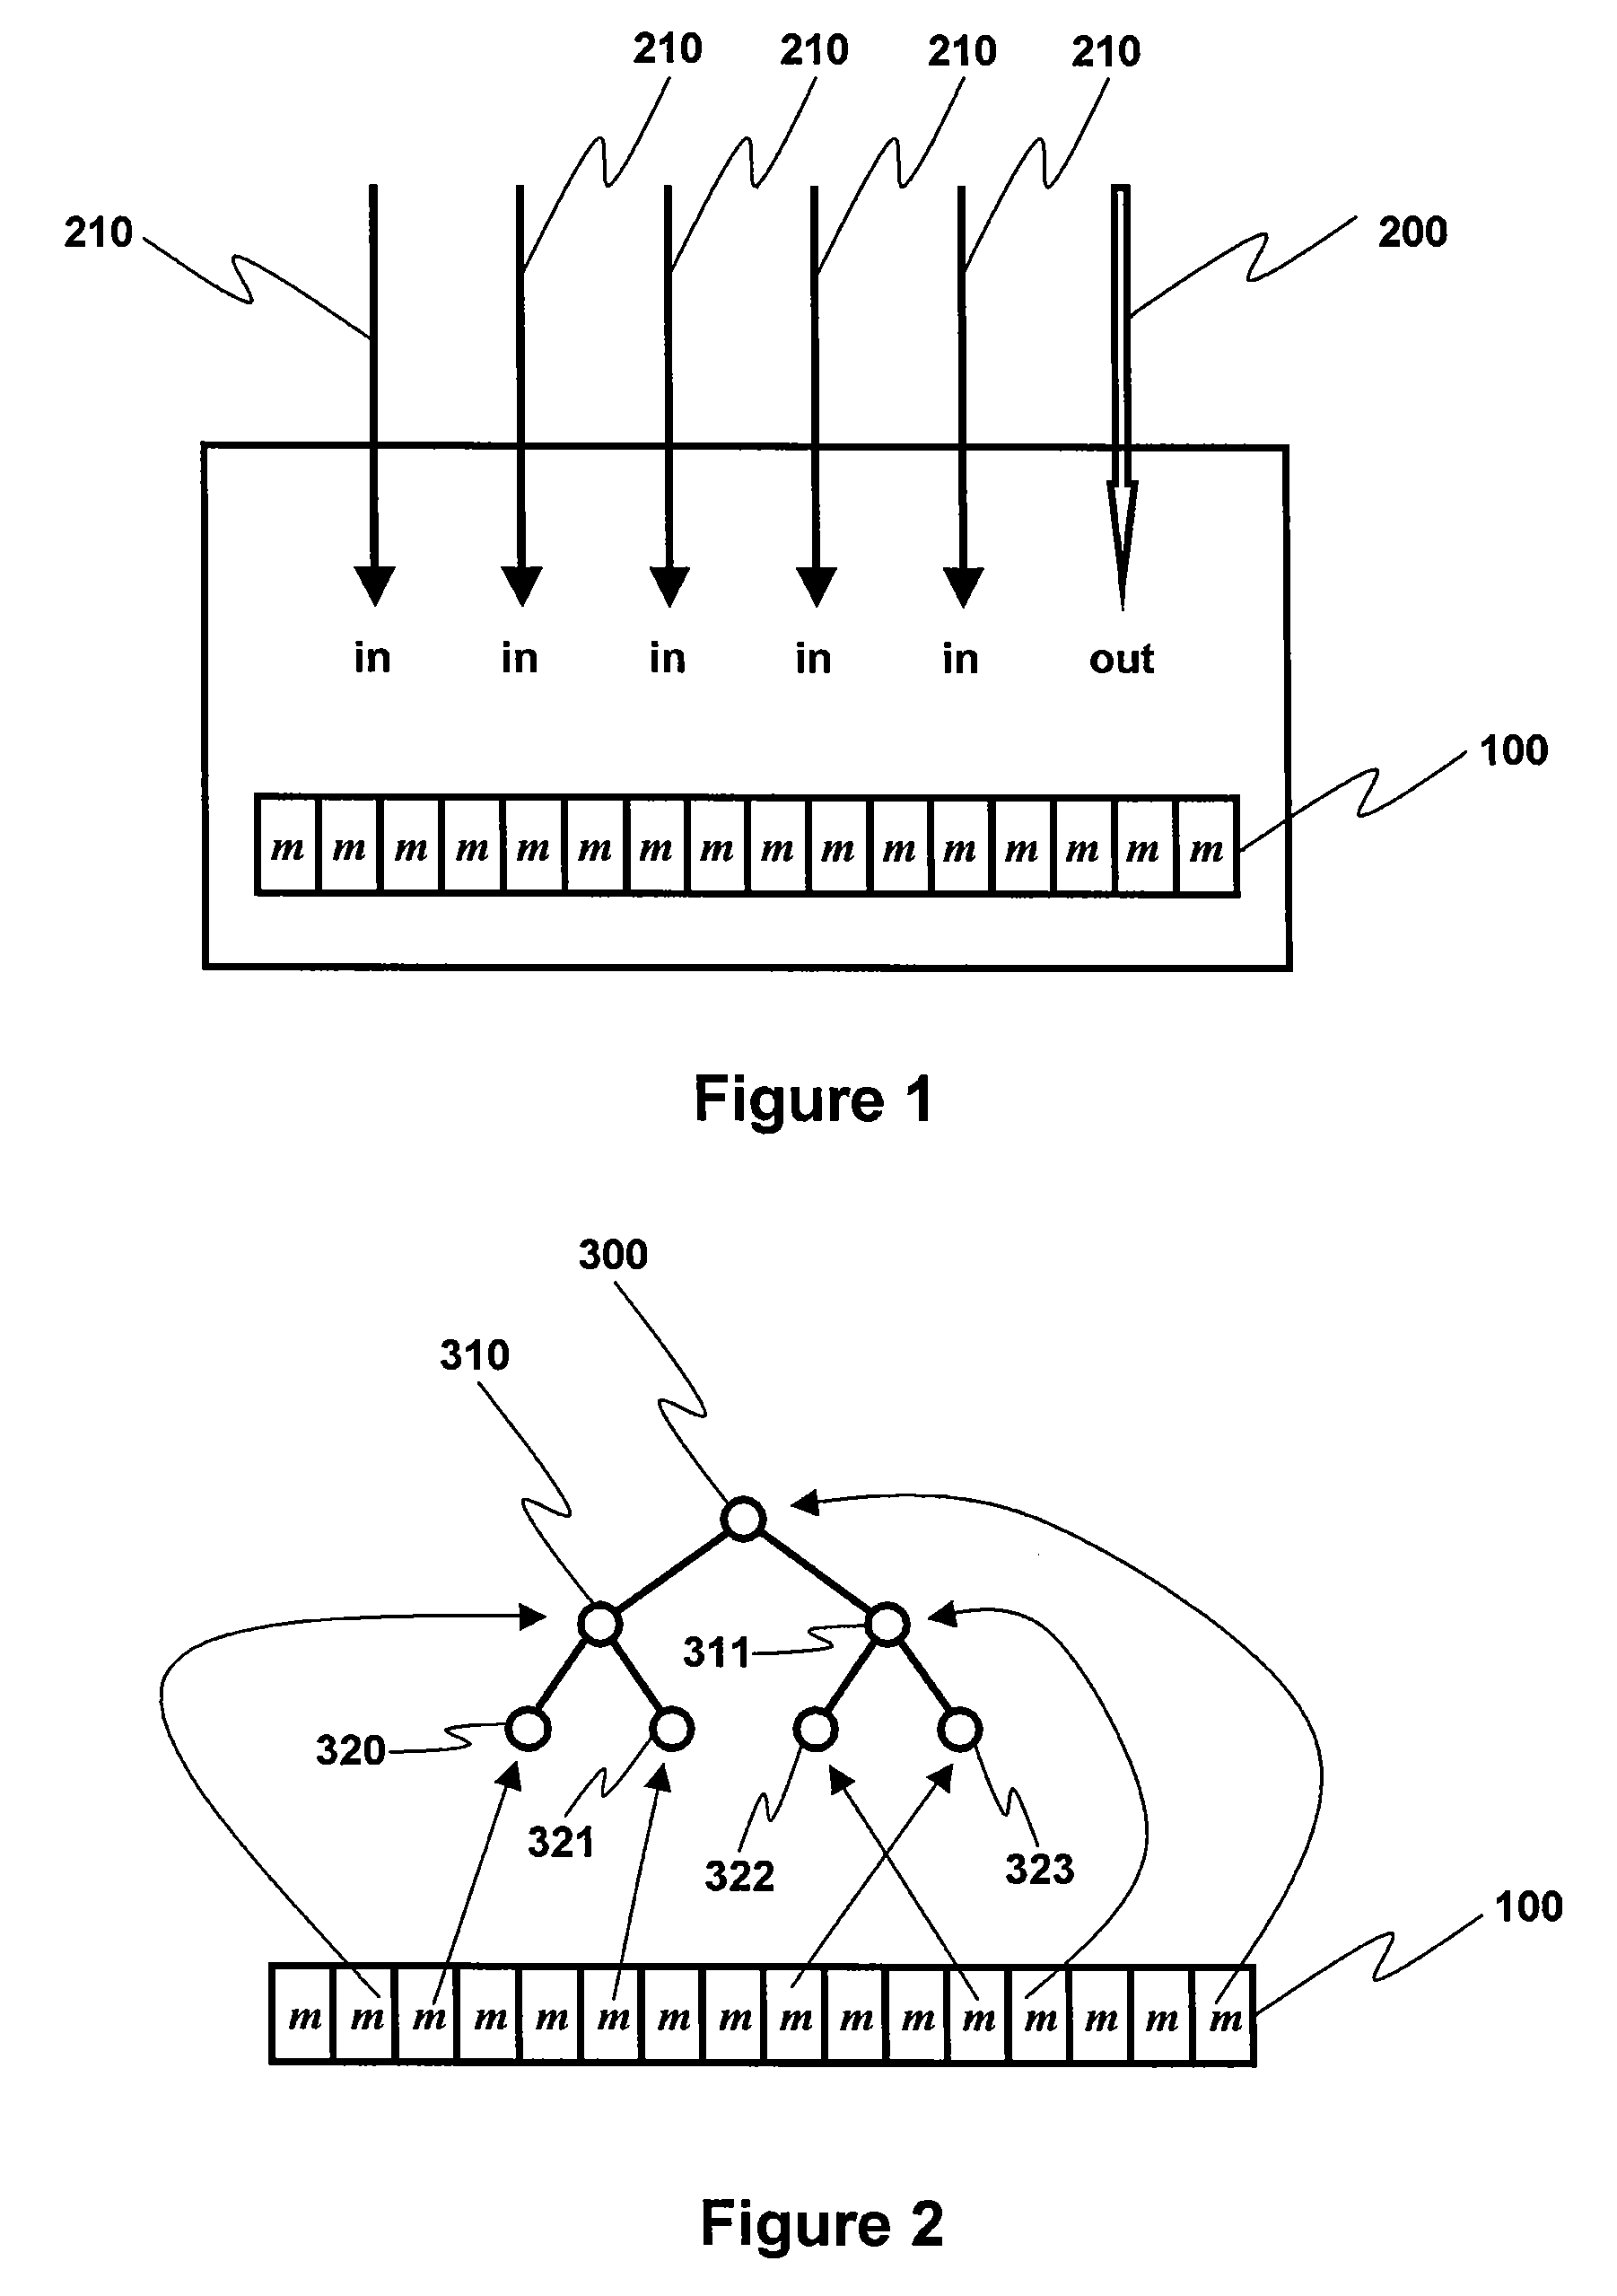 Effective use of a hardware barrier synchronization register for protocol synchronization